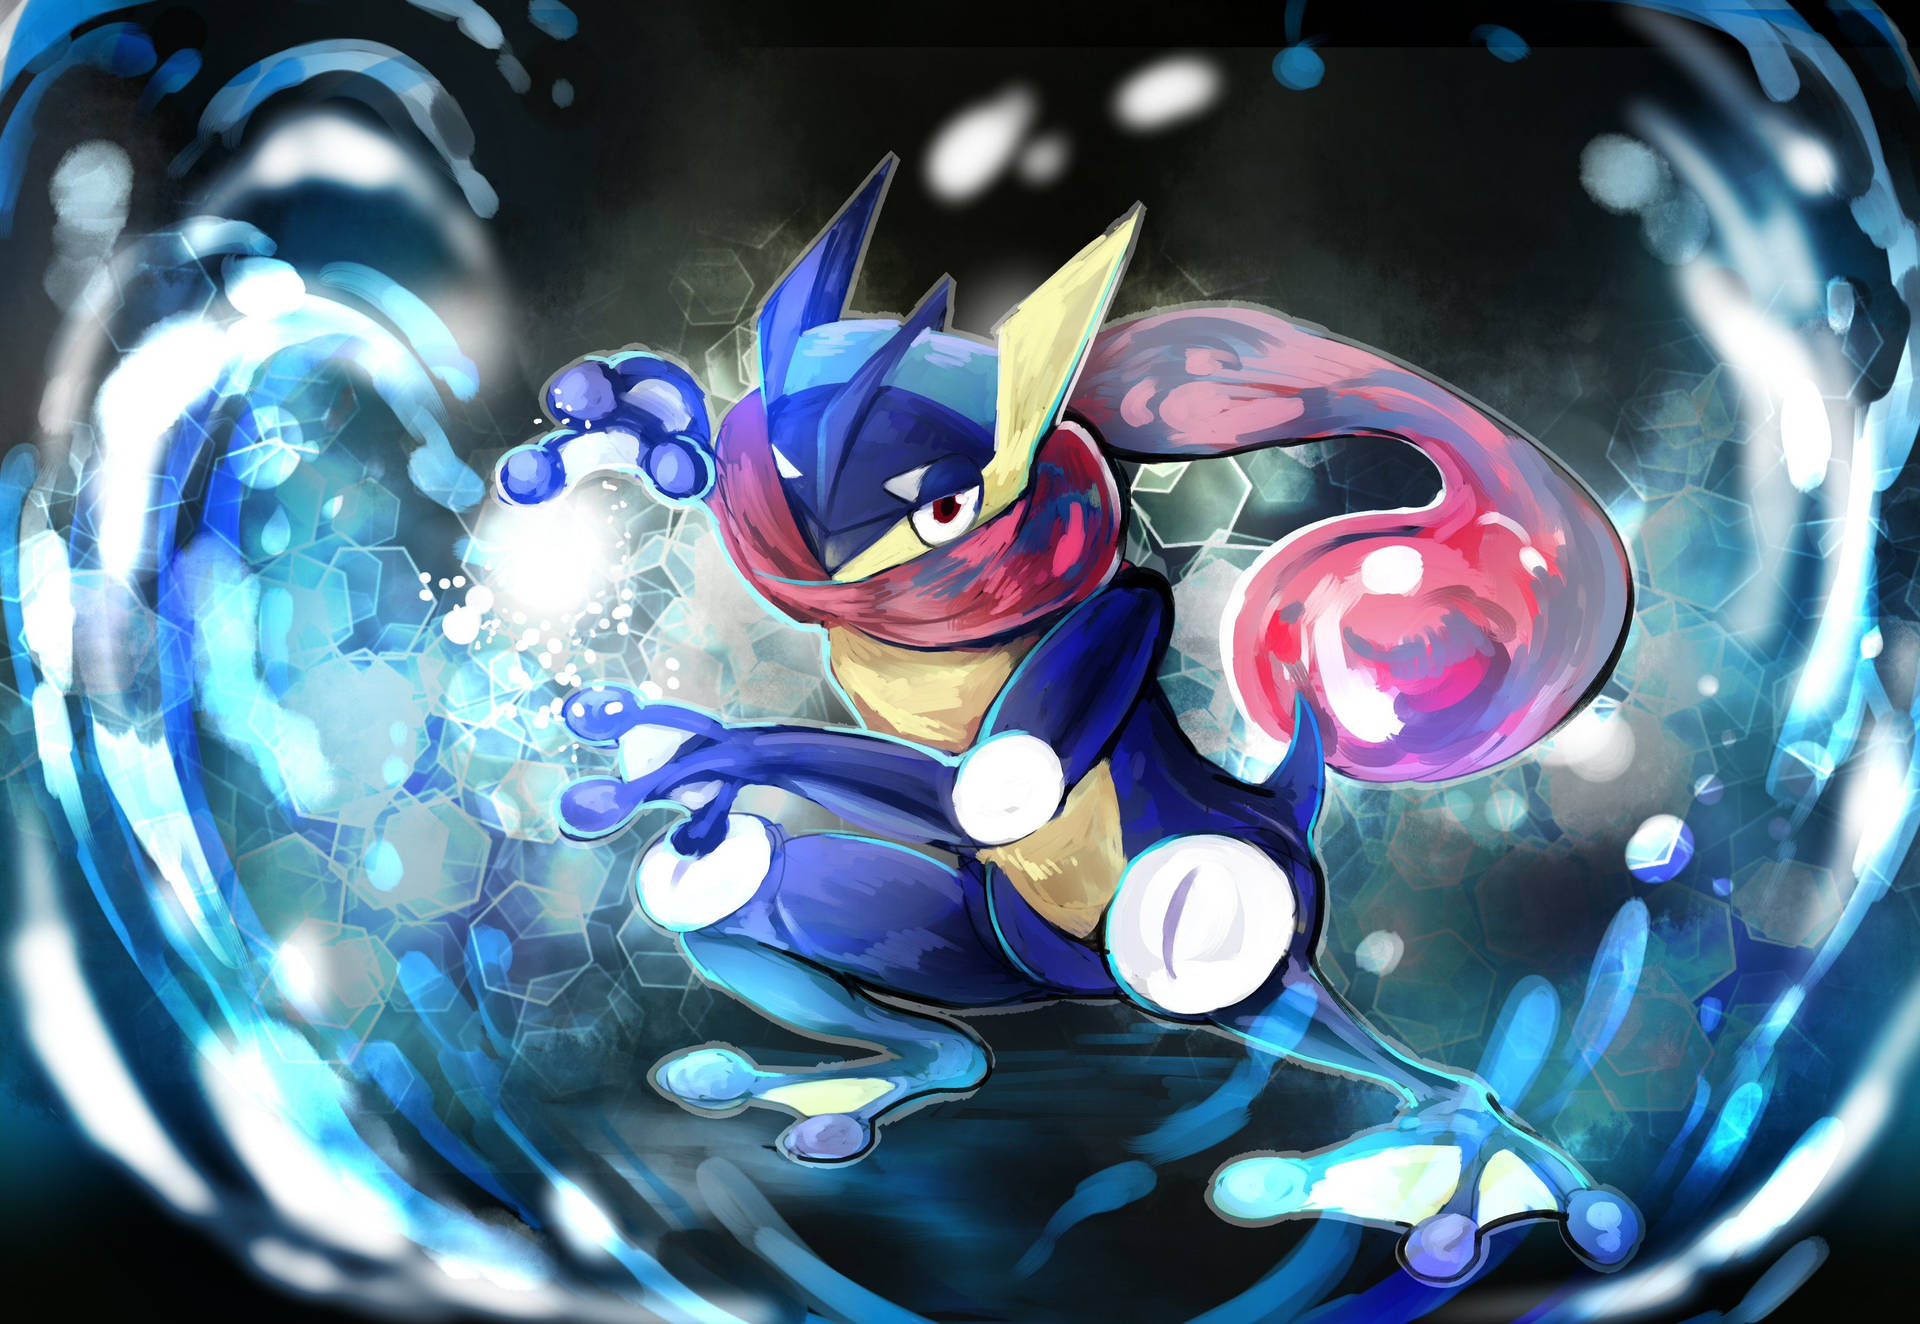 A Swift Greninja Leaps From The Waters. Background